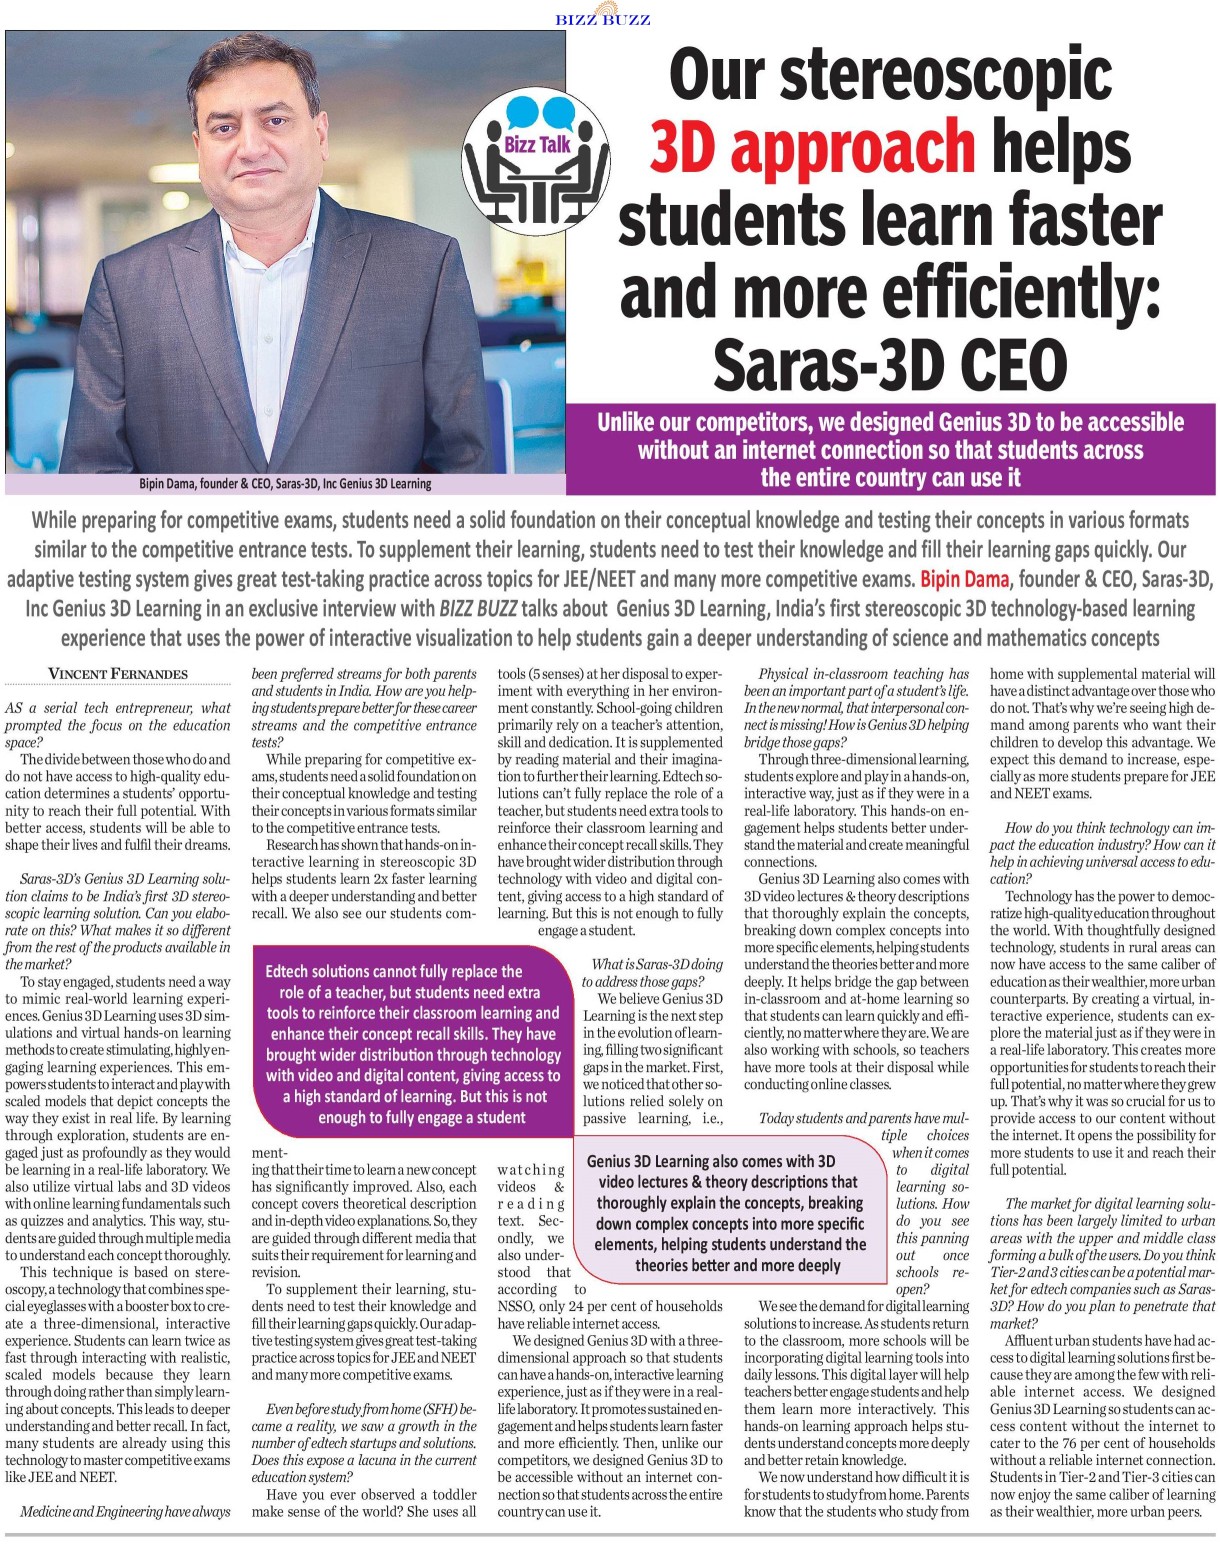 Our stereoscopic 3D approach helps students learn faster and more efficiently - Saras-3D CEO